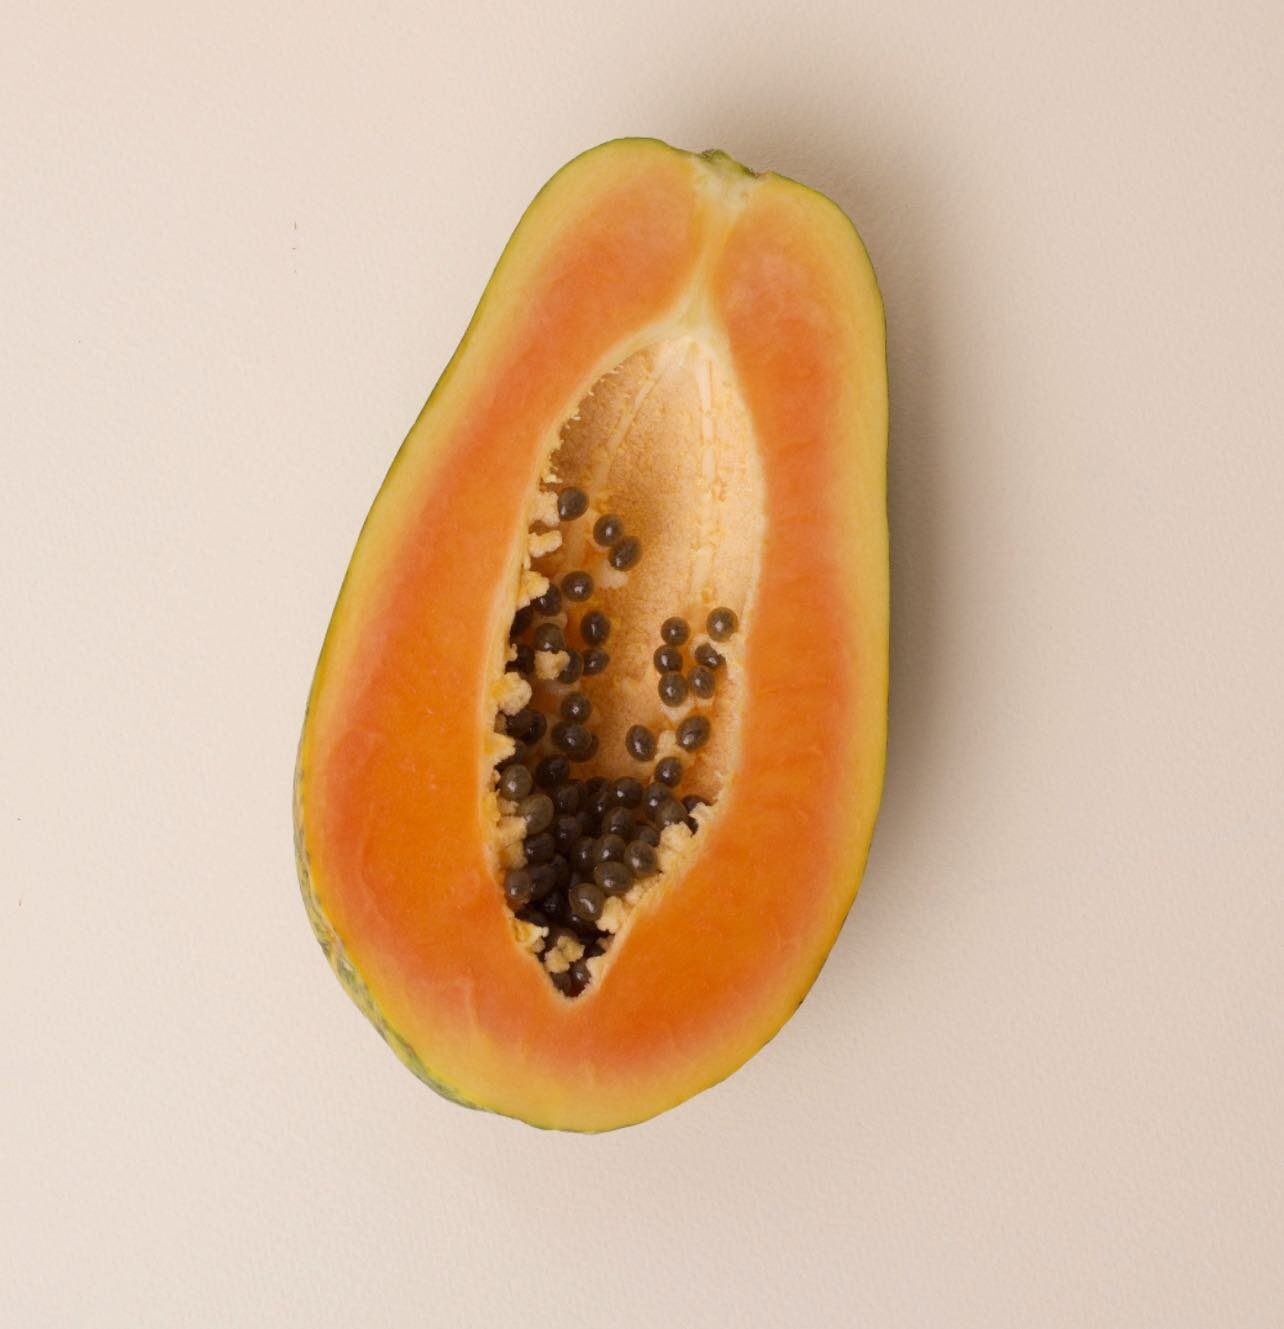 Want a skin refresh? The all powerful papaya is known for reducing dark spots (and combatting acne). Start adding our C-Food bites into your routine for bright, glowy skin ✨